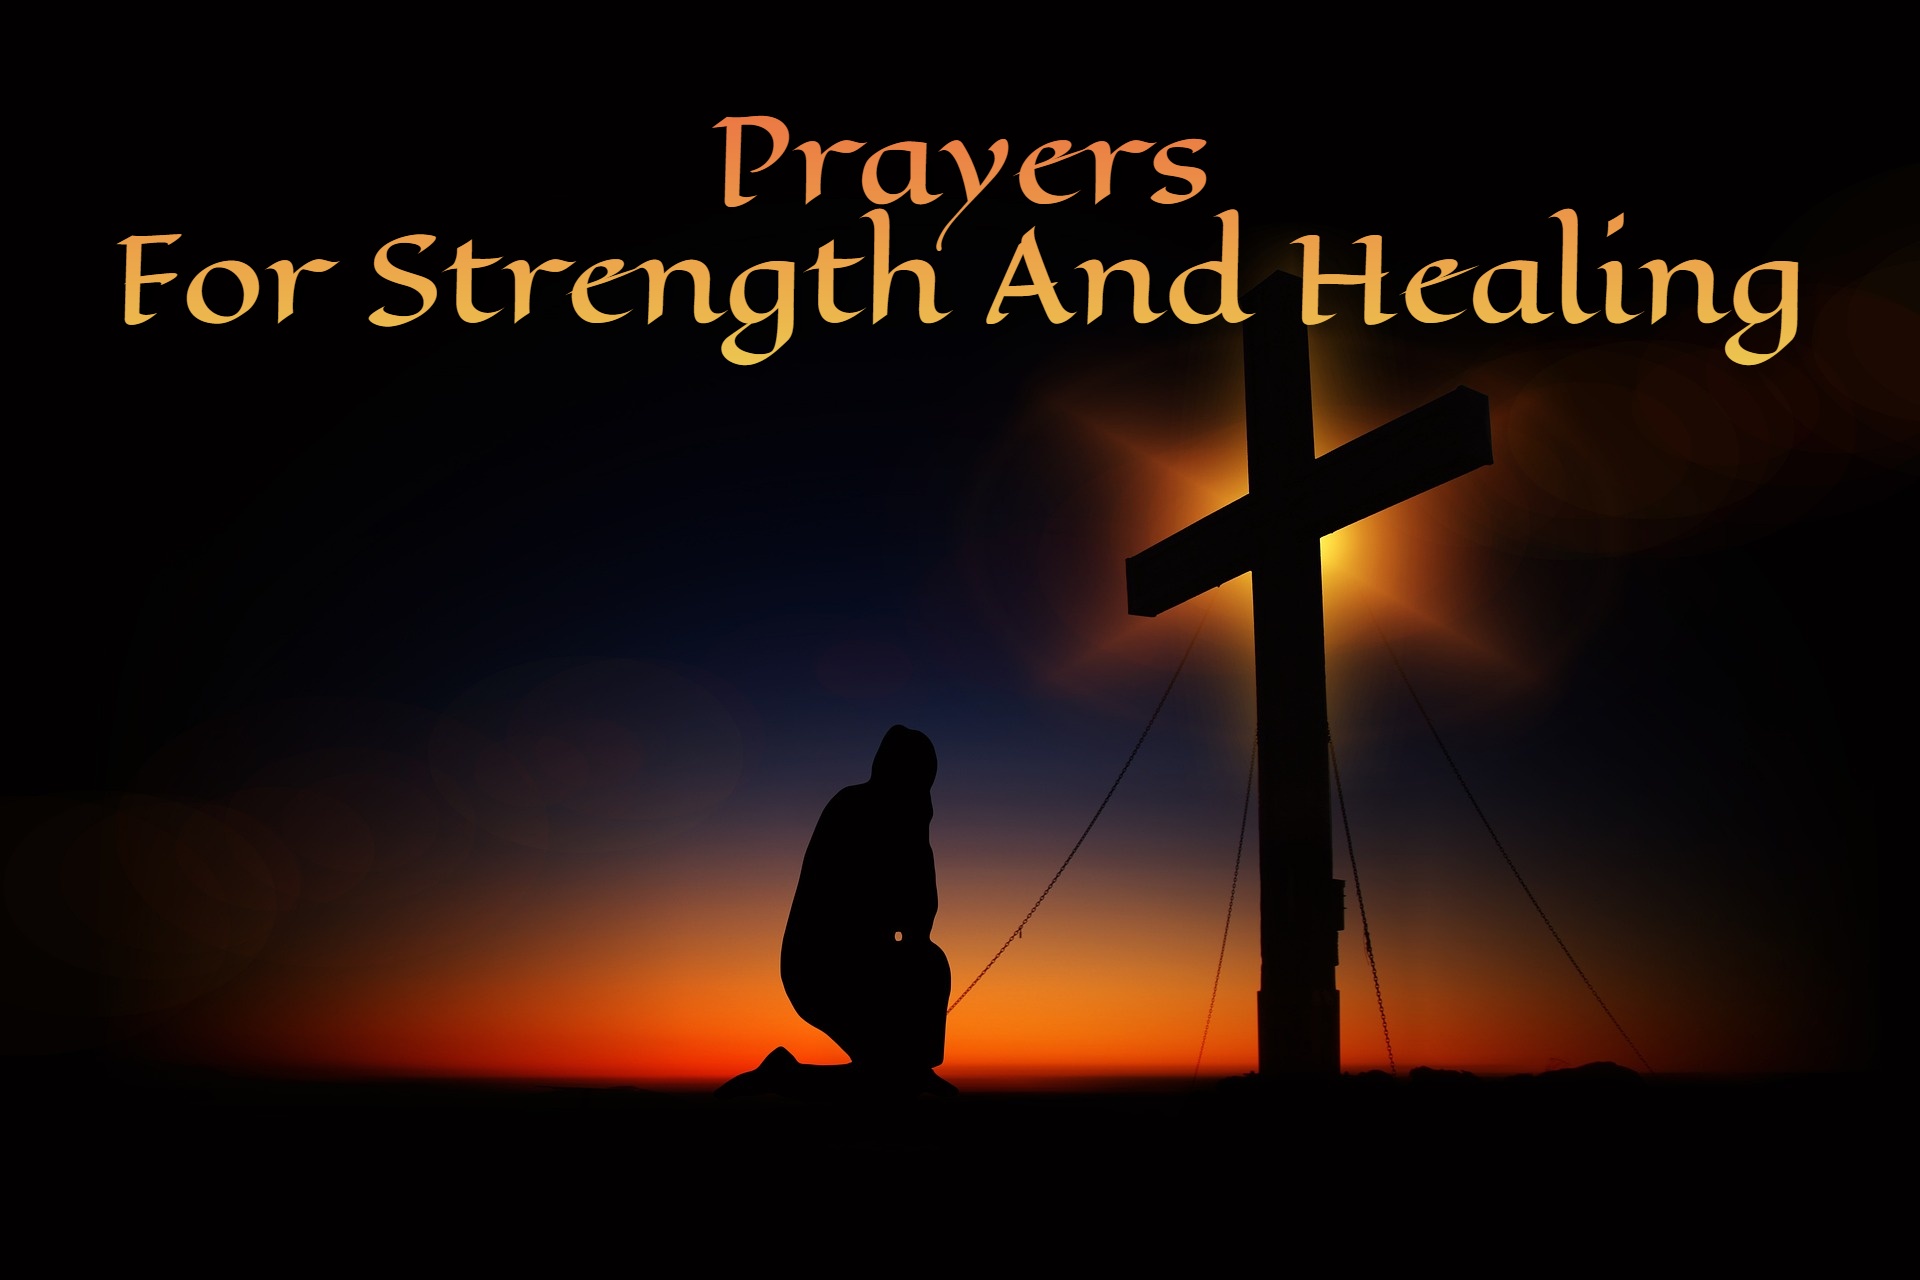 Prayers For Strength And Healing - How To Get The Most Out Of Prayers And How They Work For You